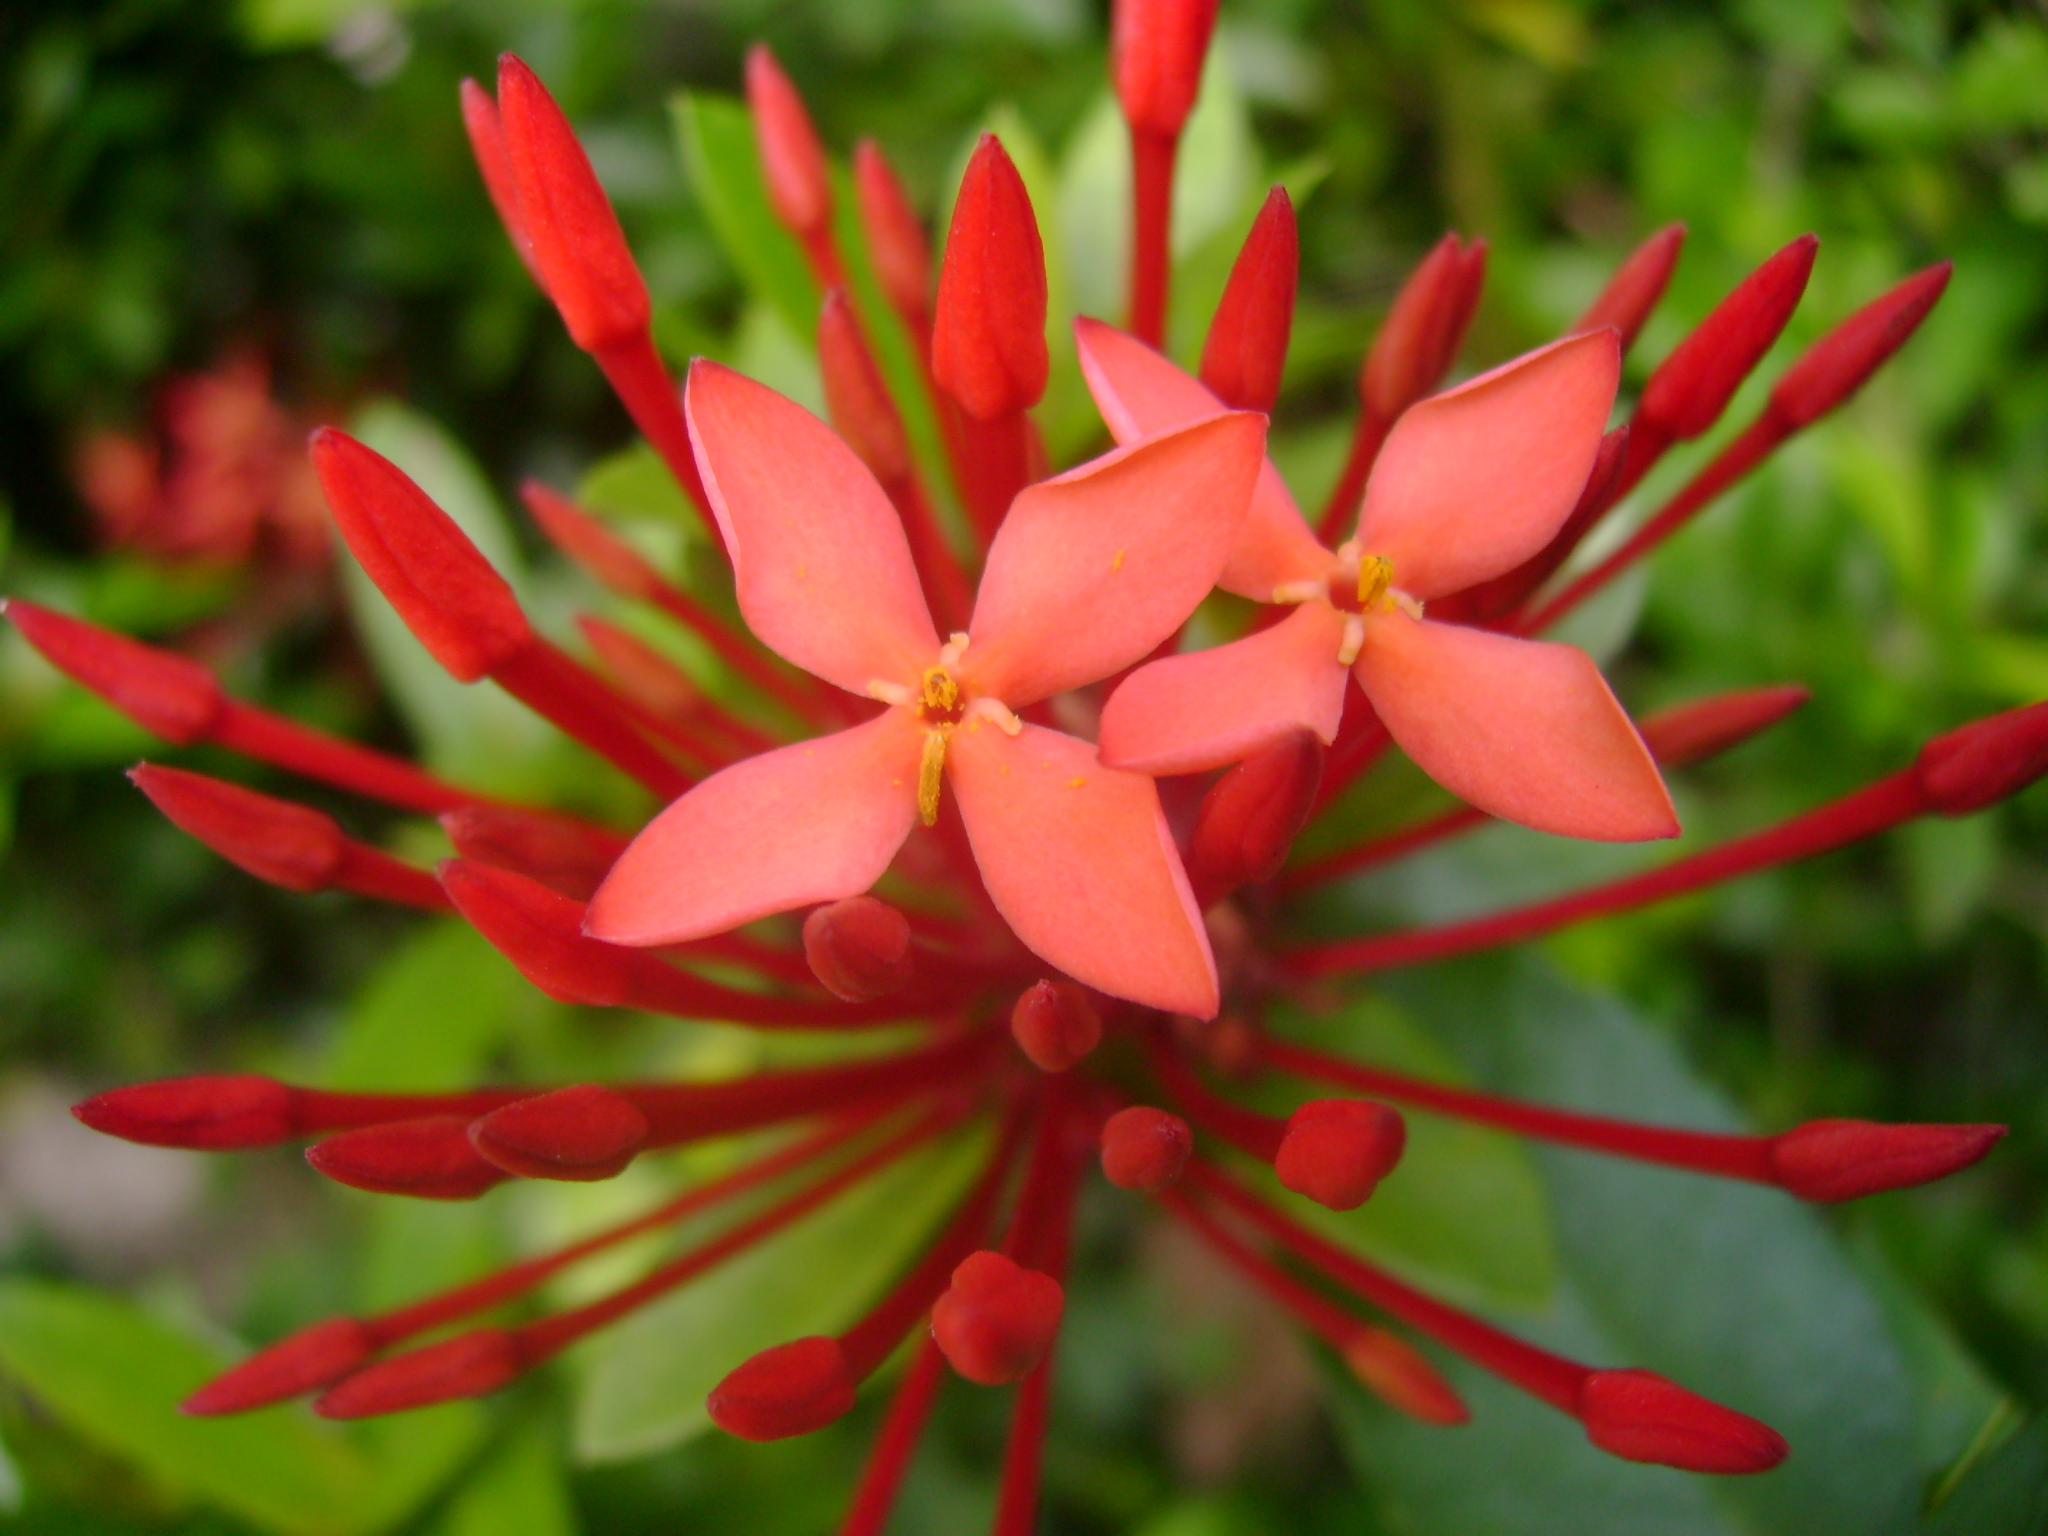 a red flower is shown here in the image